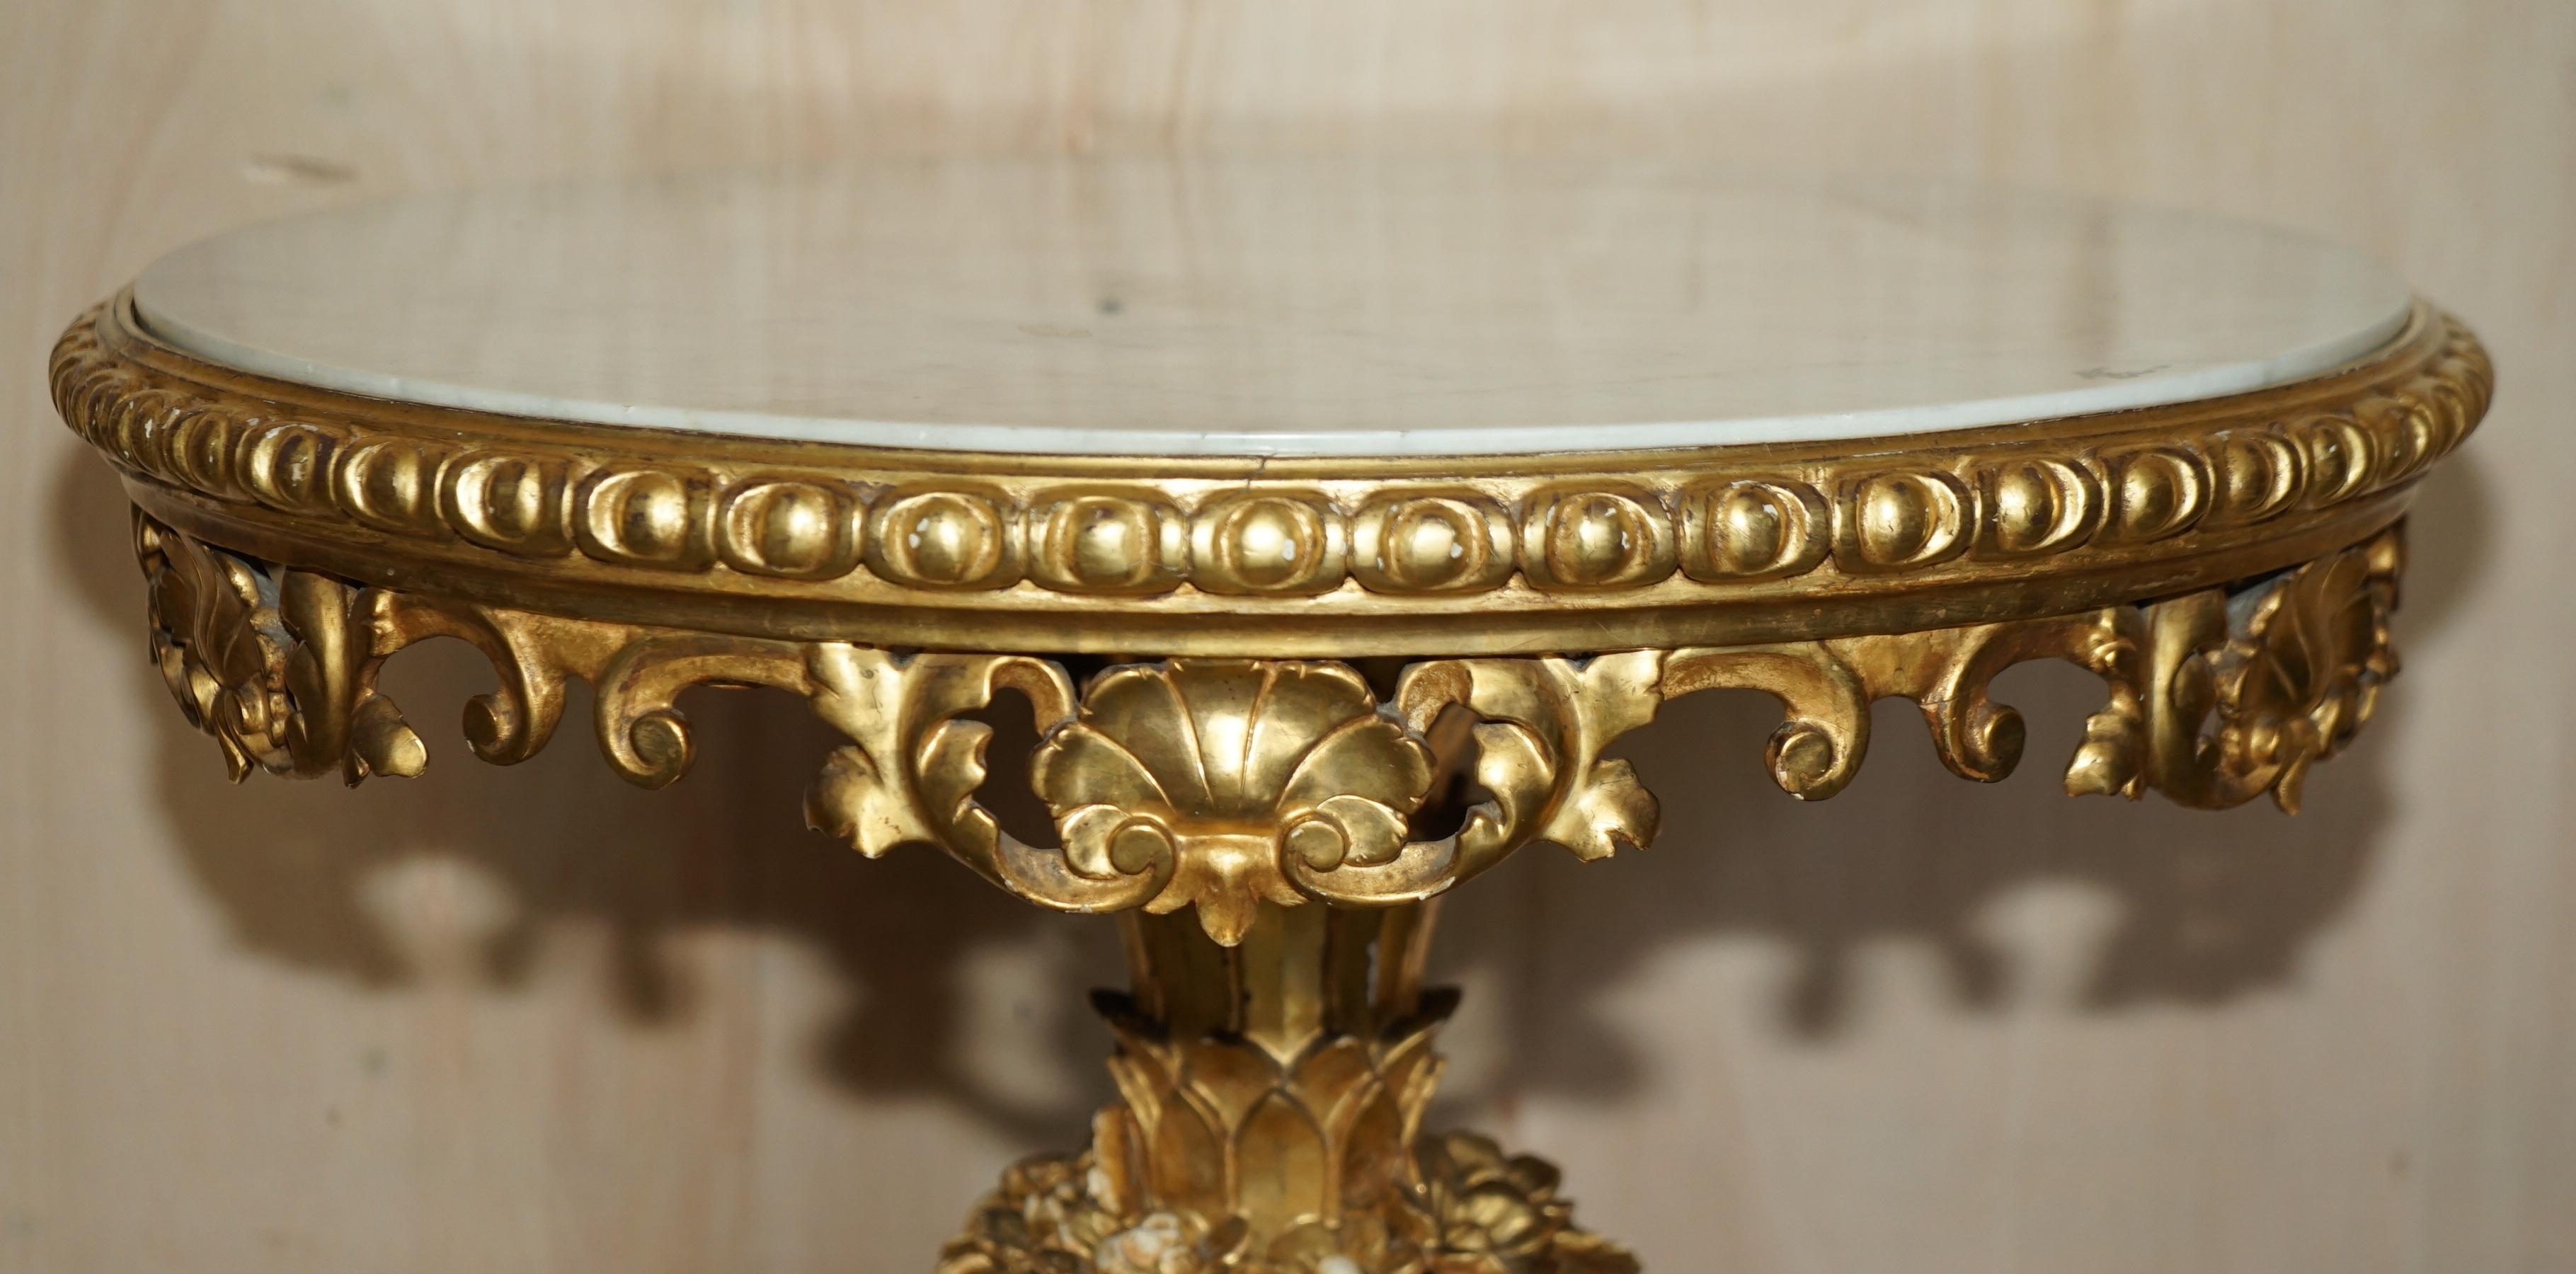 We are delighted to offer for sale this very fine and important, French circa 1860 hand carved centre table with giltwood body and Italian marble top.

A very collectable and well made, decorative centre table, this is pure art furniture and looks